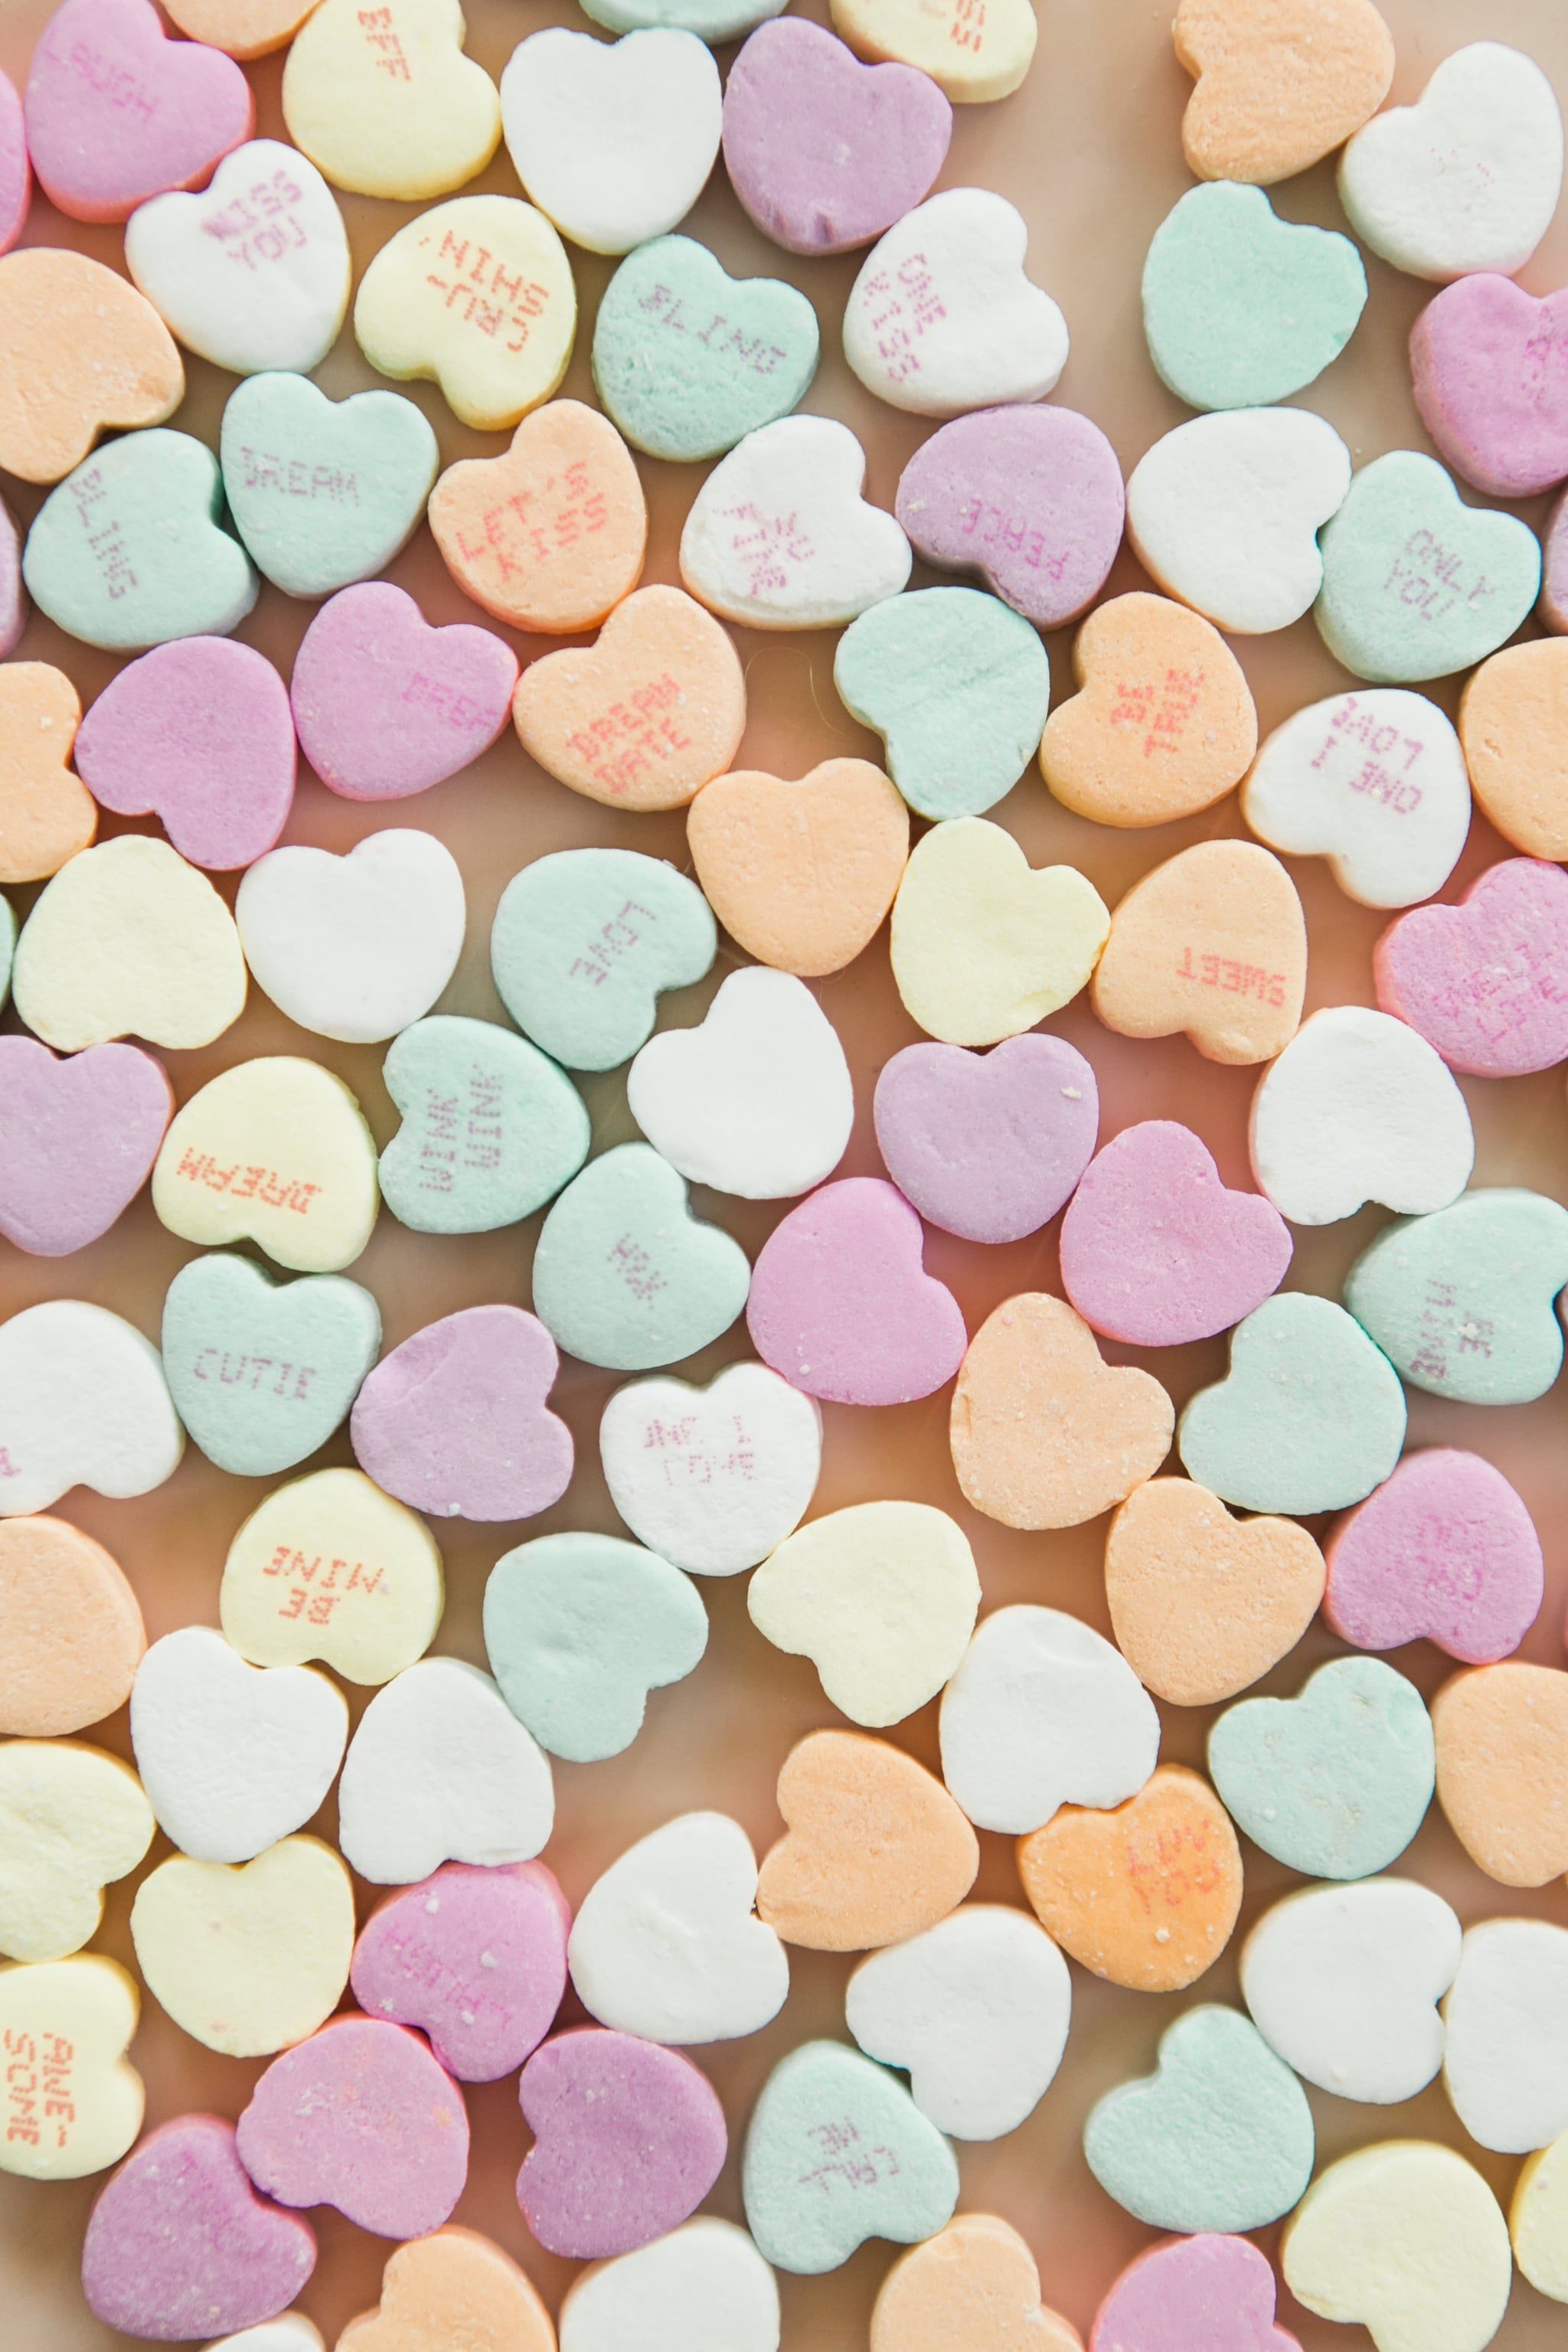 A pile of candy hearts with different sayings on them. - Valentine's Day, heart, candy, colorful, bling